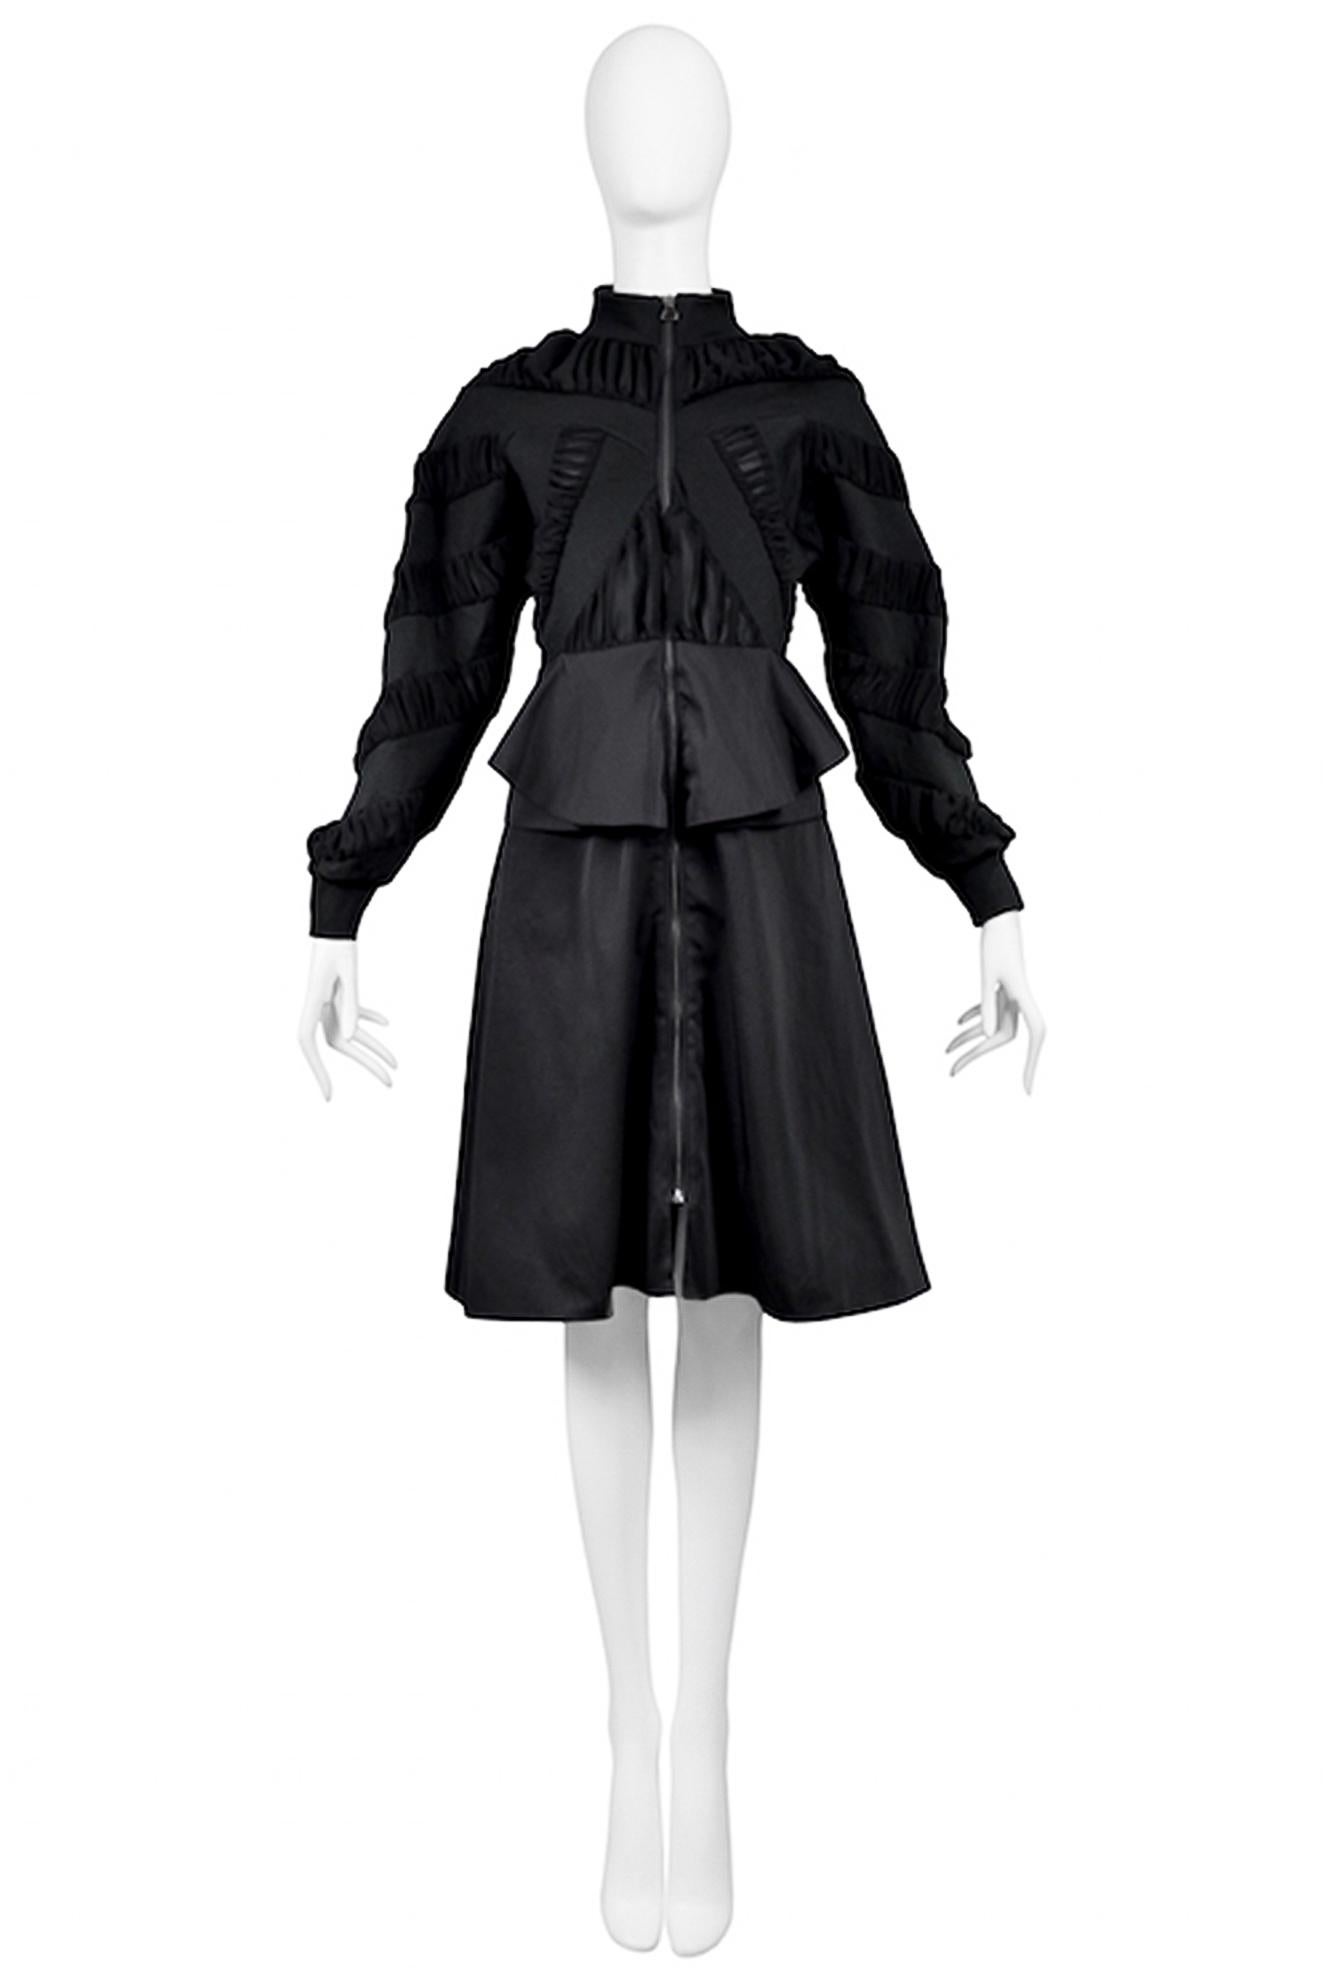 Balenciaga By Ghesquiere Black Peplum Coat Dress In Excellent Condition For Sale In Los Angeles, CA